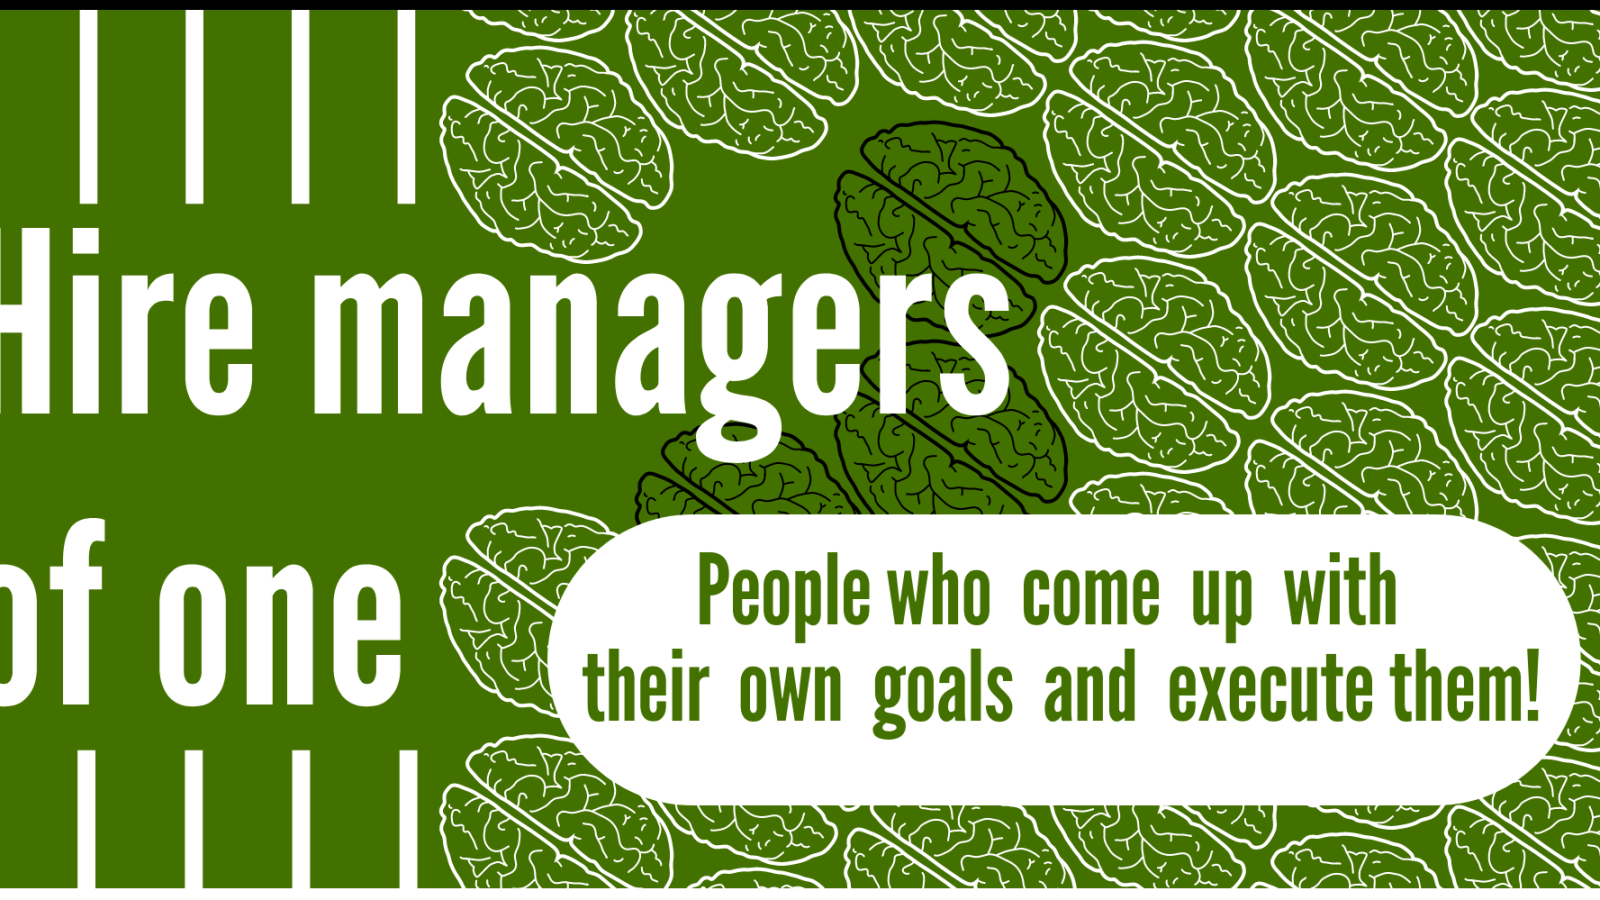 Hire managers of one